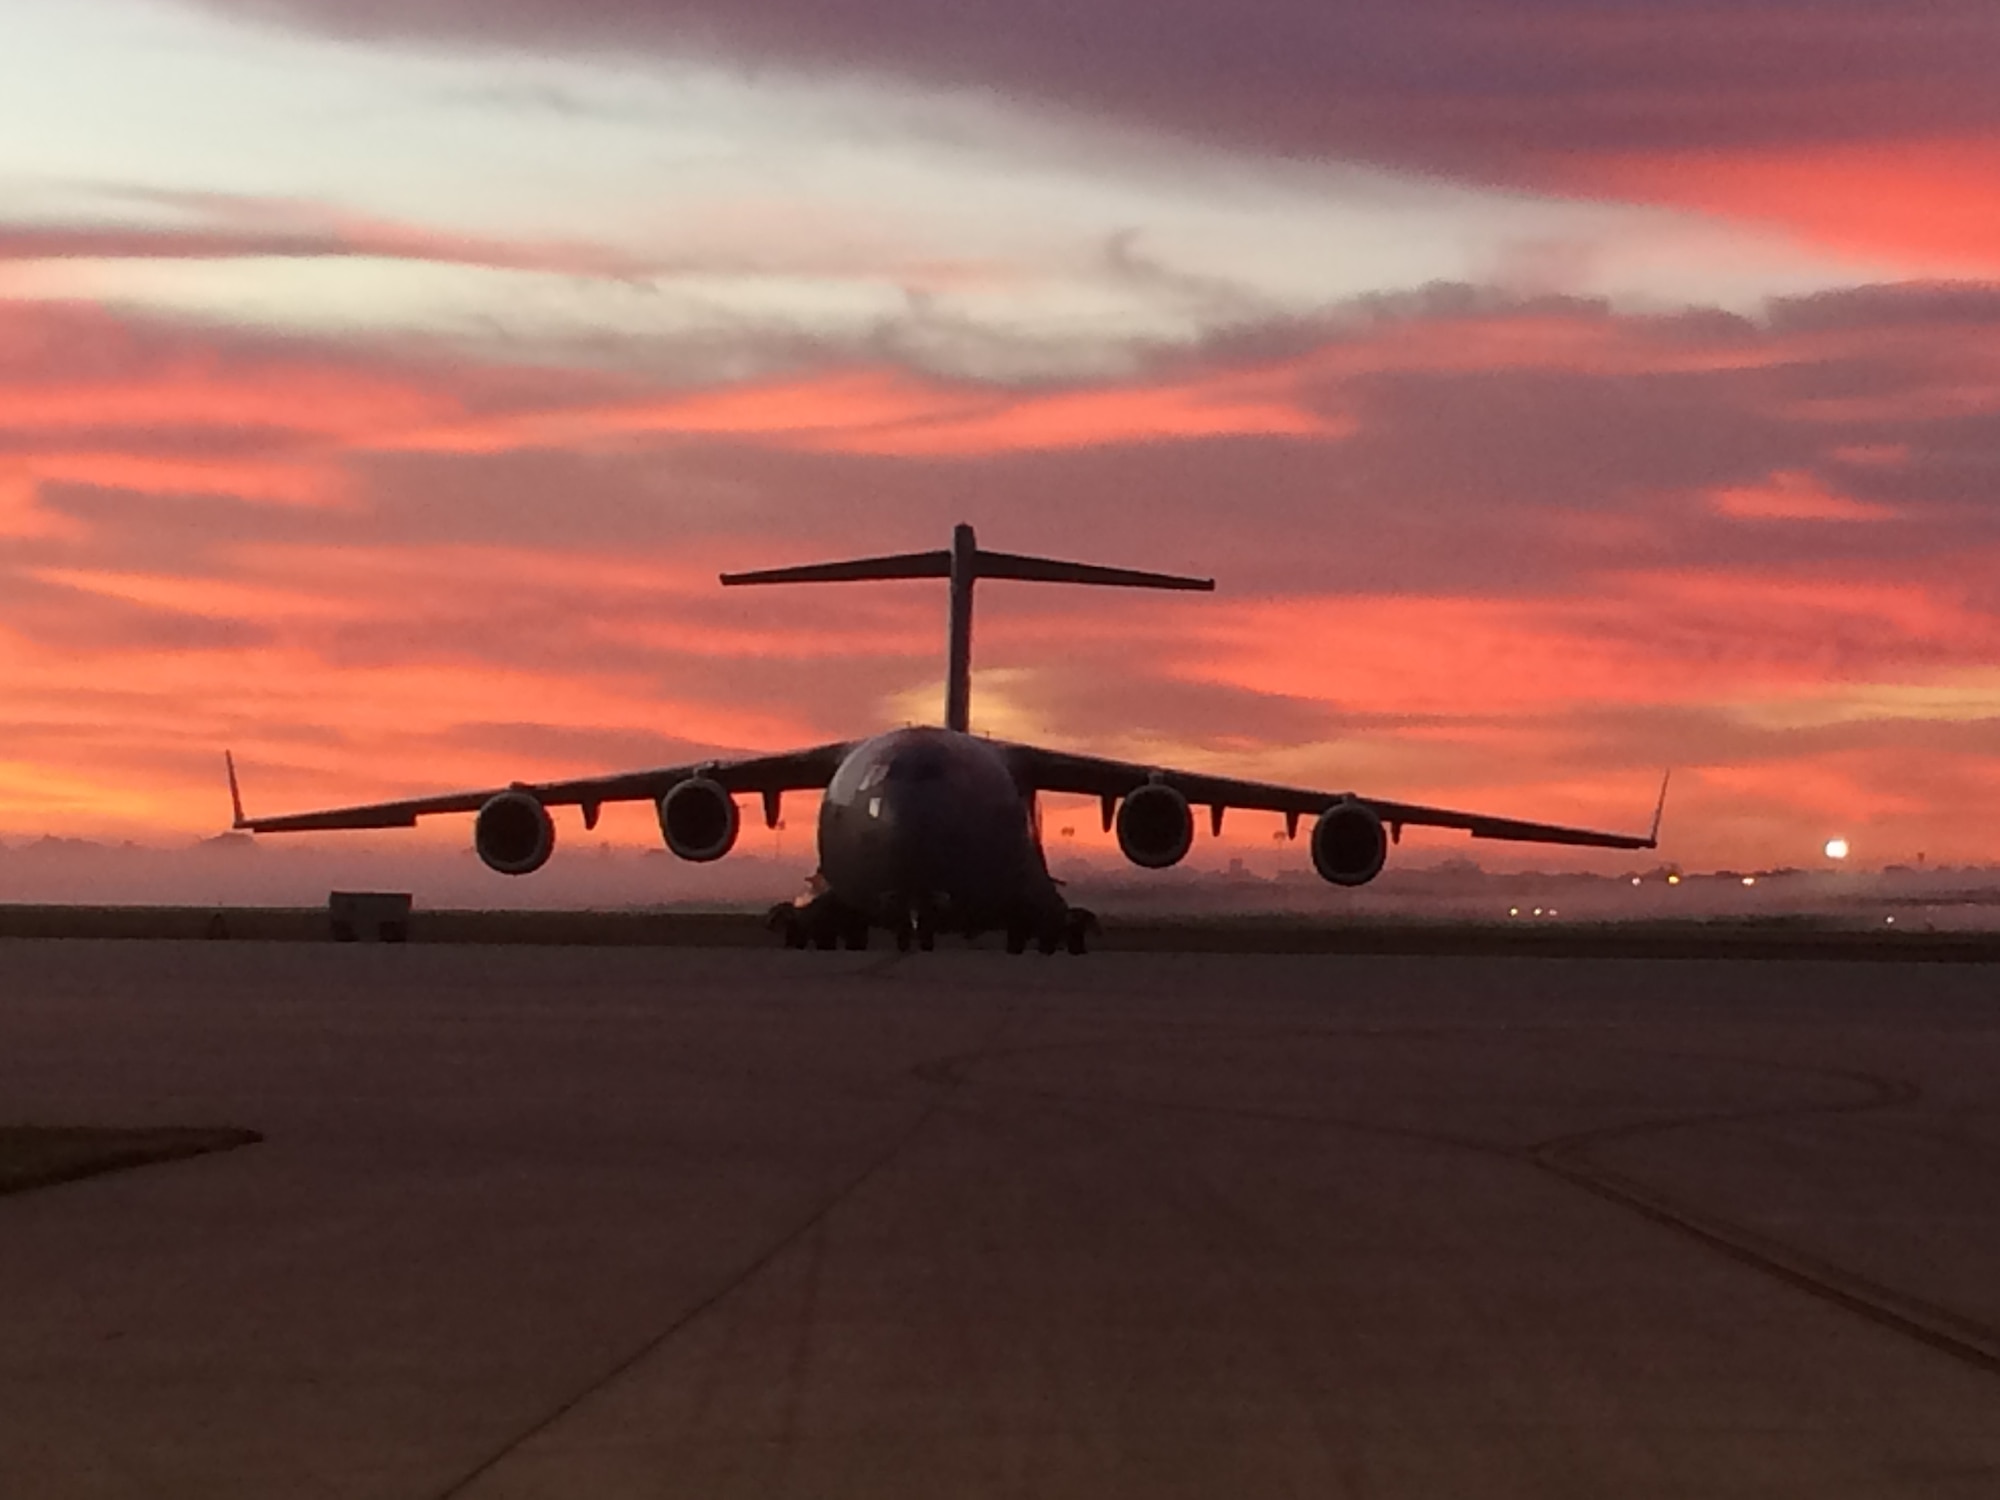 WRIGHT-PATTERSON AIR FORCE BASE, Ohio – The early morning sunrise and background fog highlights a 445th Airlift Wing C-17 Globemaster III sitting on the ramp at Wright-Patterson Air Force Base, Ohio Oct. 6, 2015. The fall temperature mixed with moisture in the air caused a blanket of fog to highlight the beauty of the aircraft. (U.S. Air Force photo/Master Sgt. Brock Felgenhauer)